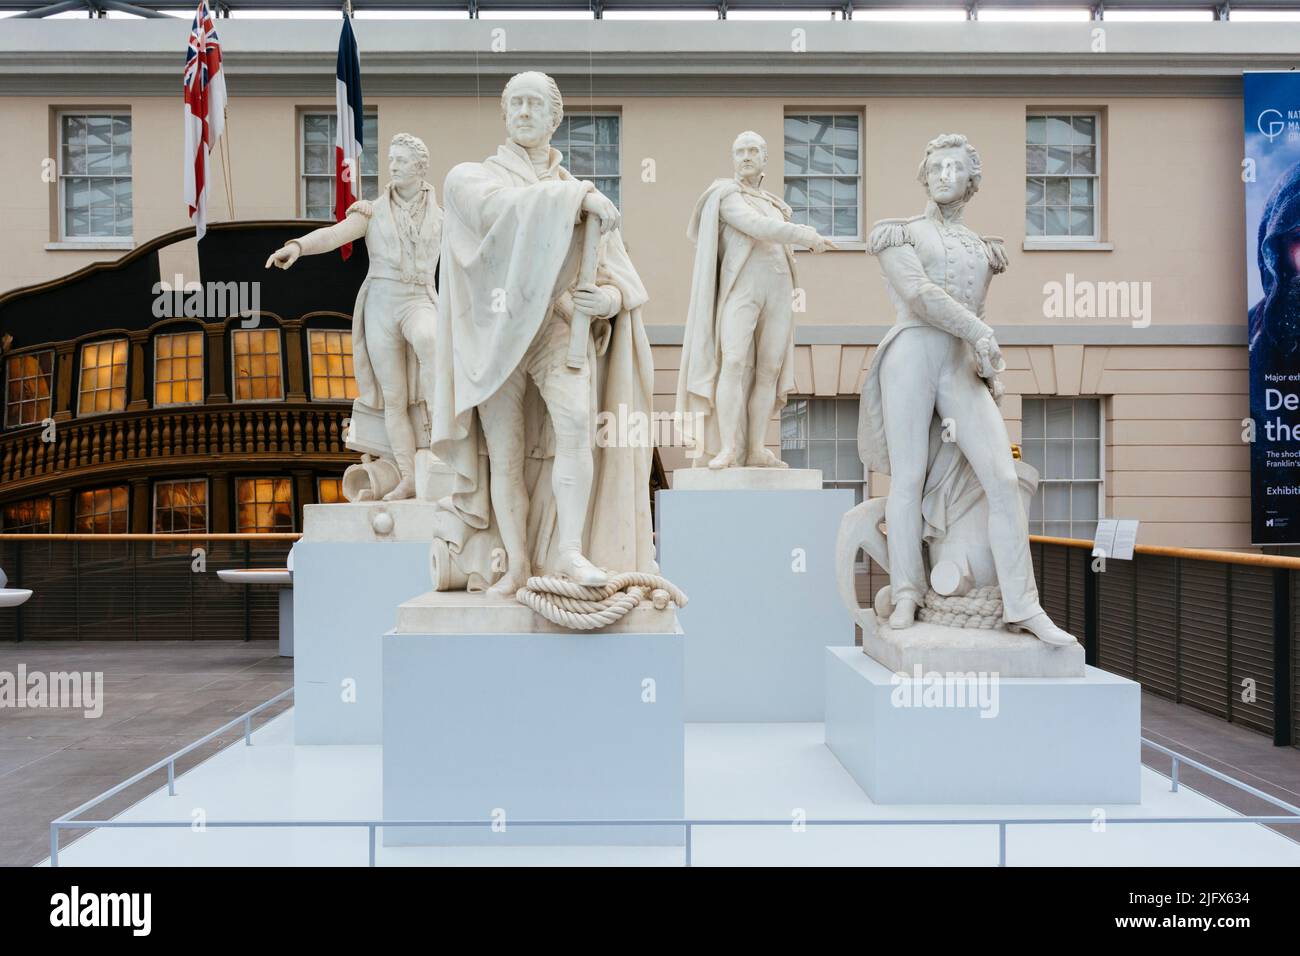 Statues of illustrious British sailors. The National Maritime Museum, NMM, is a maritime museum in Greenwich, London. It is part of Royal Museums Gree Stock Photo